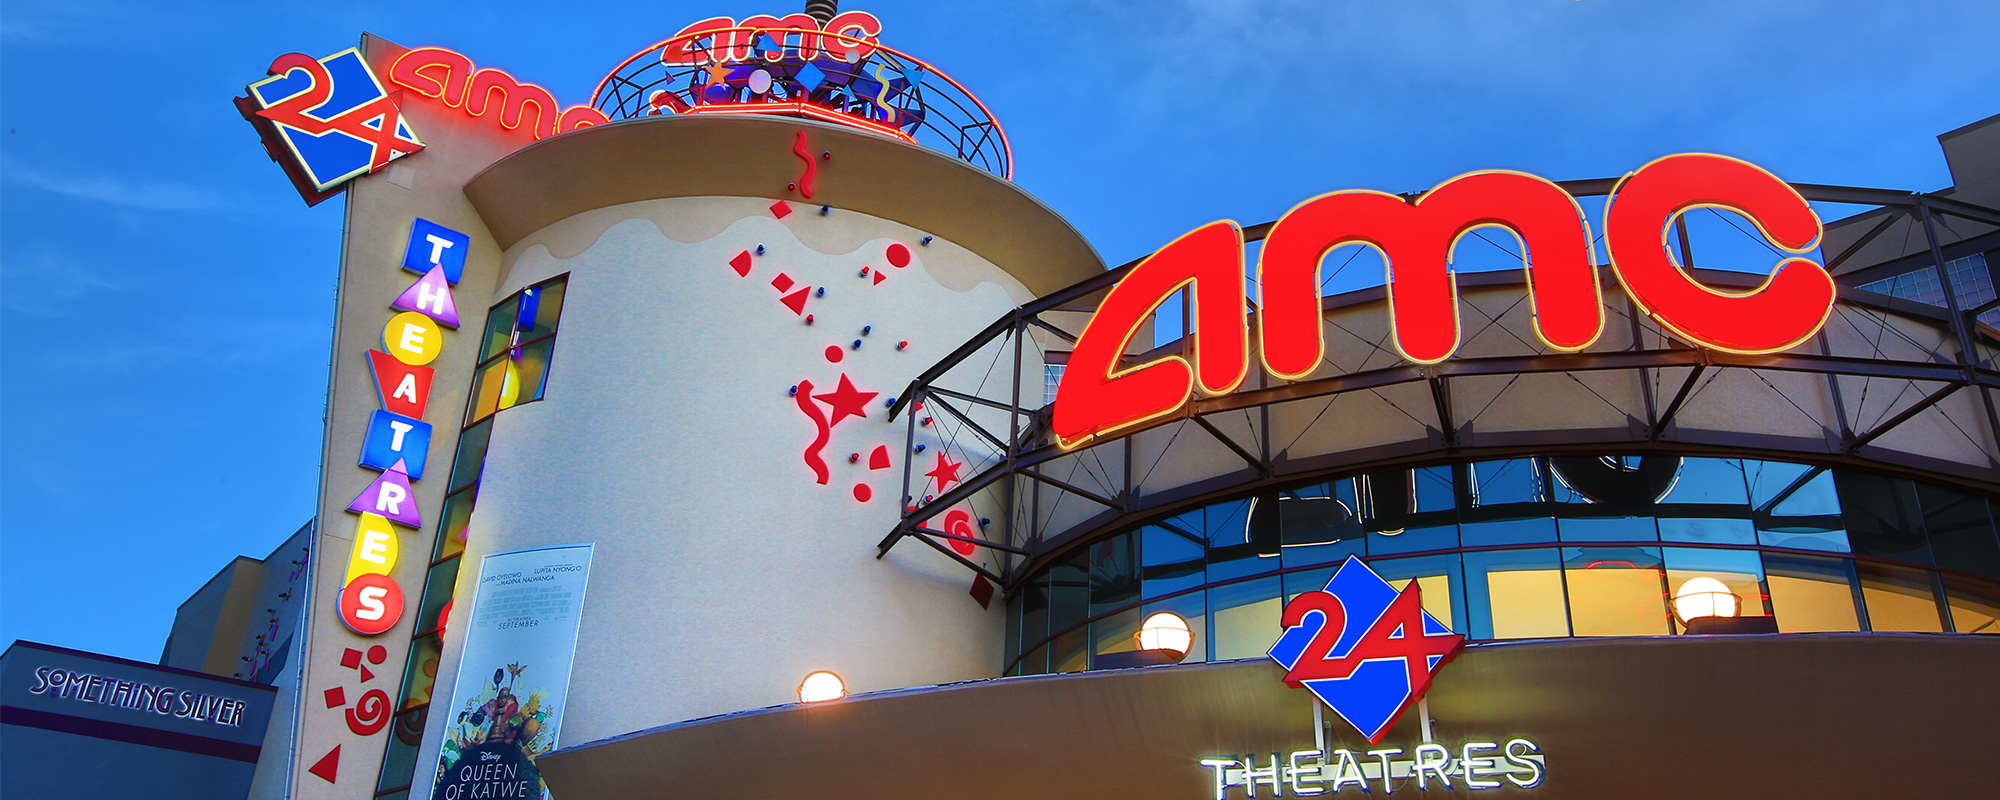 Amazon Could Be Looking to Purchase AMC Theaters ...